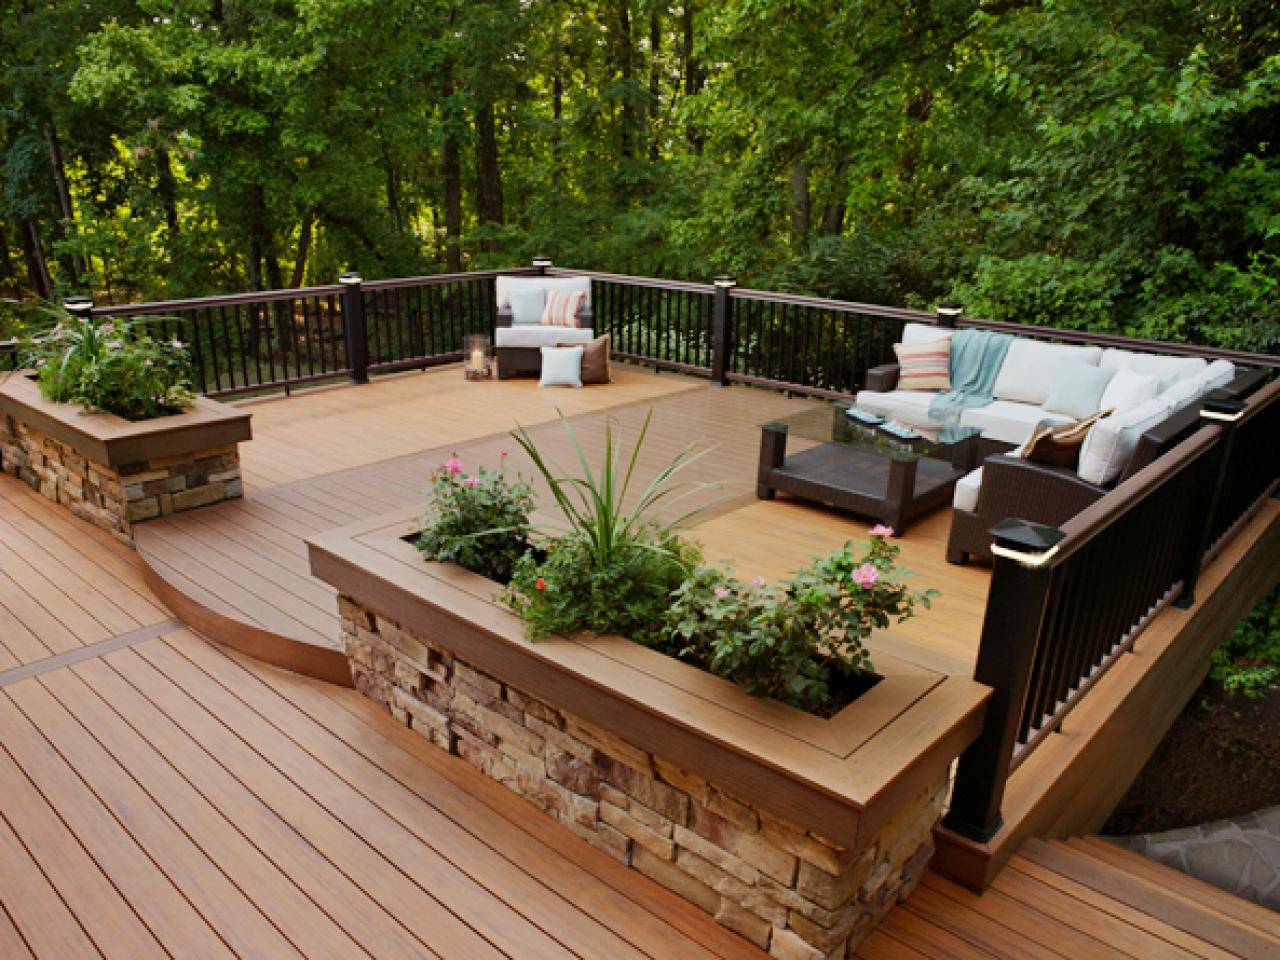 A Fabulous Outdoor Living Space